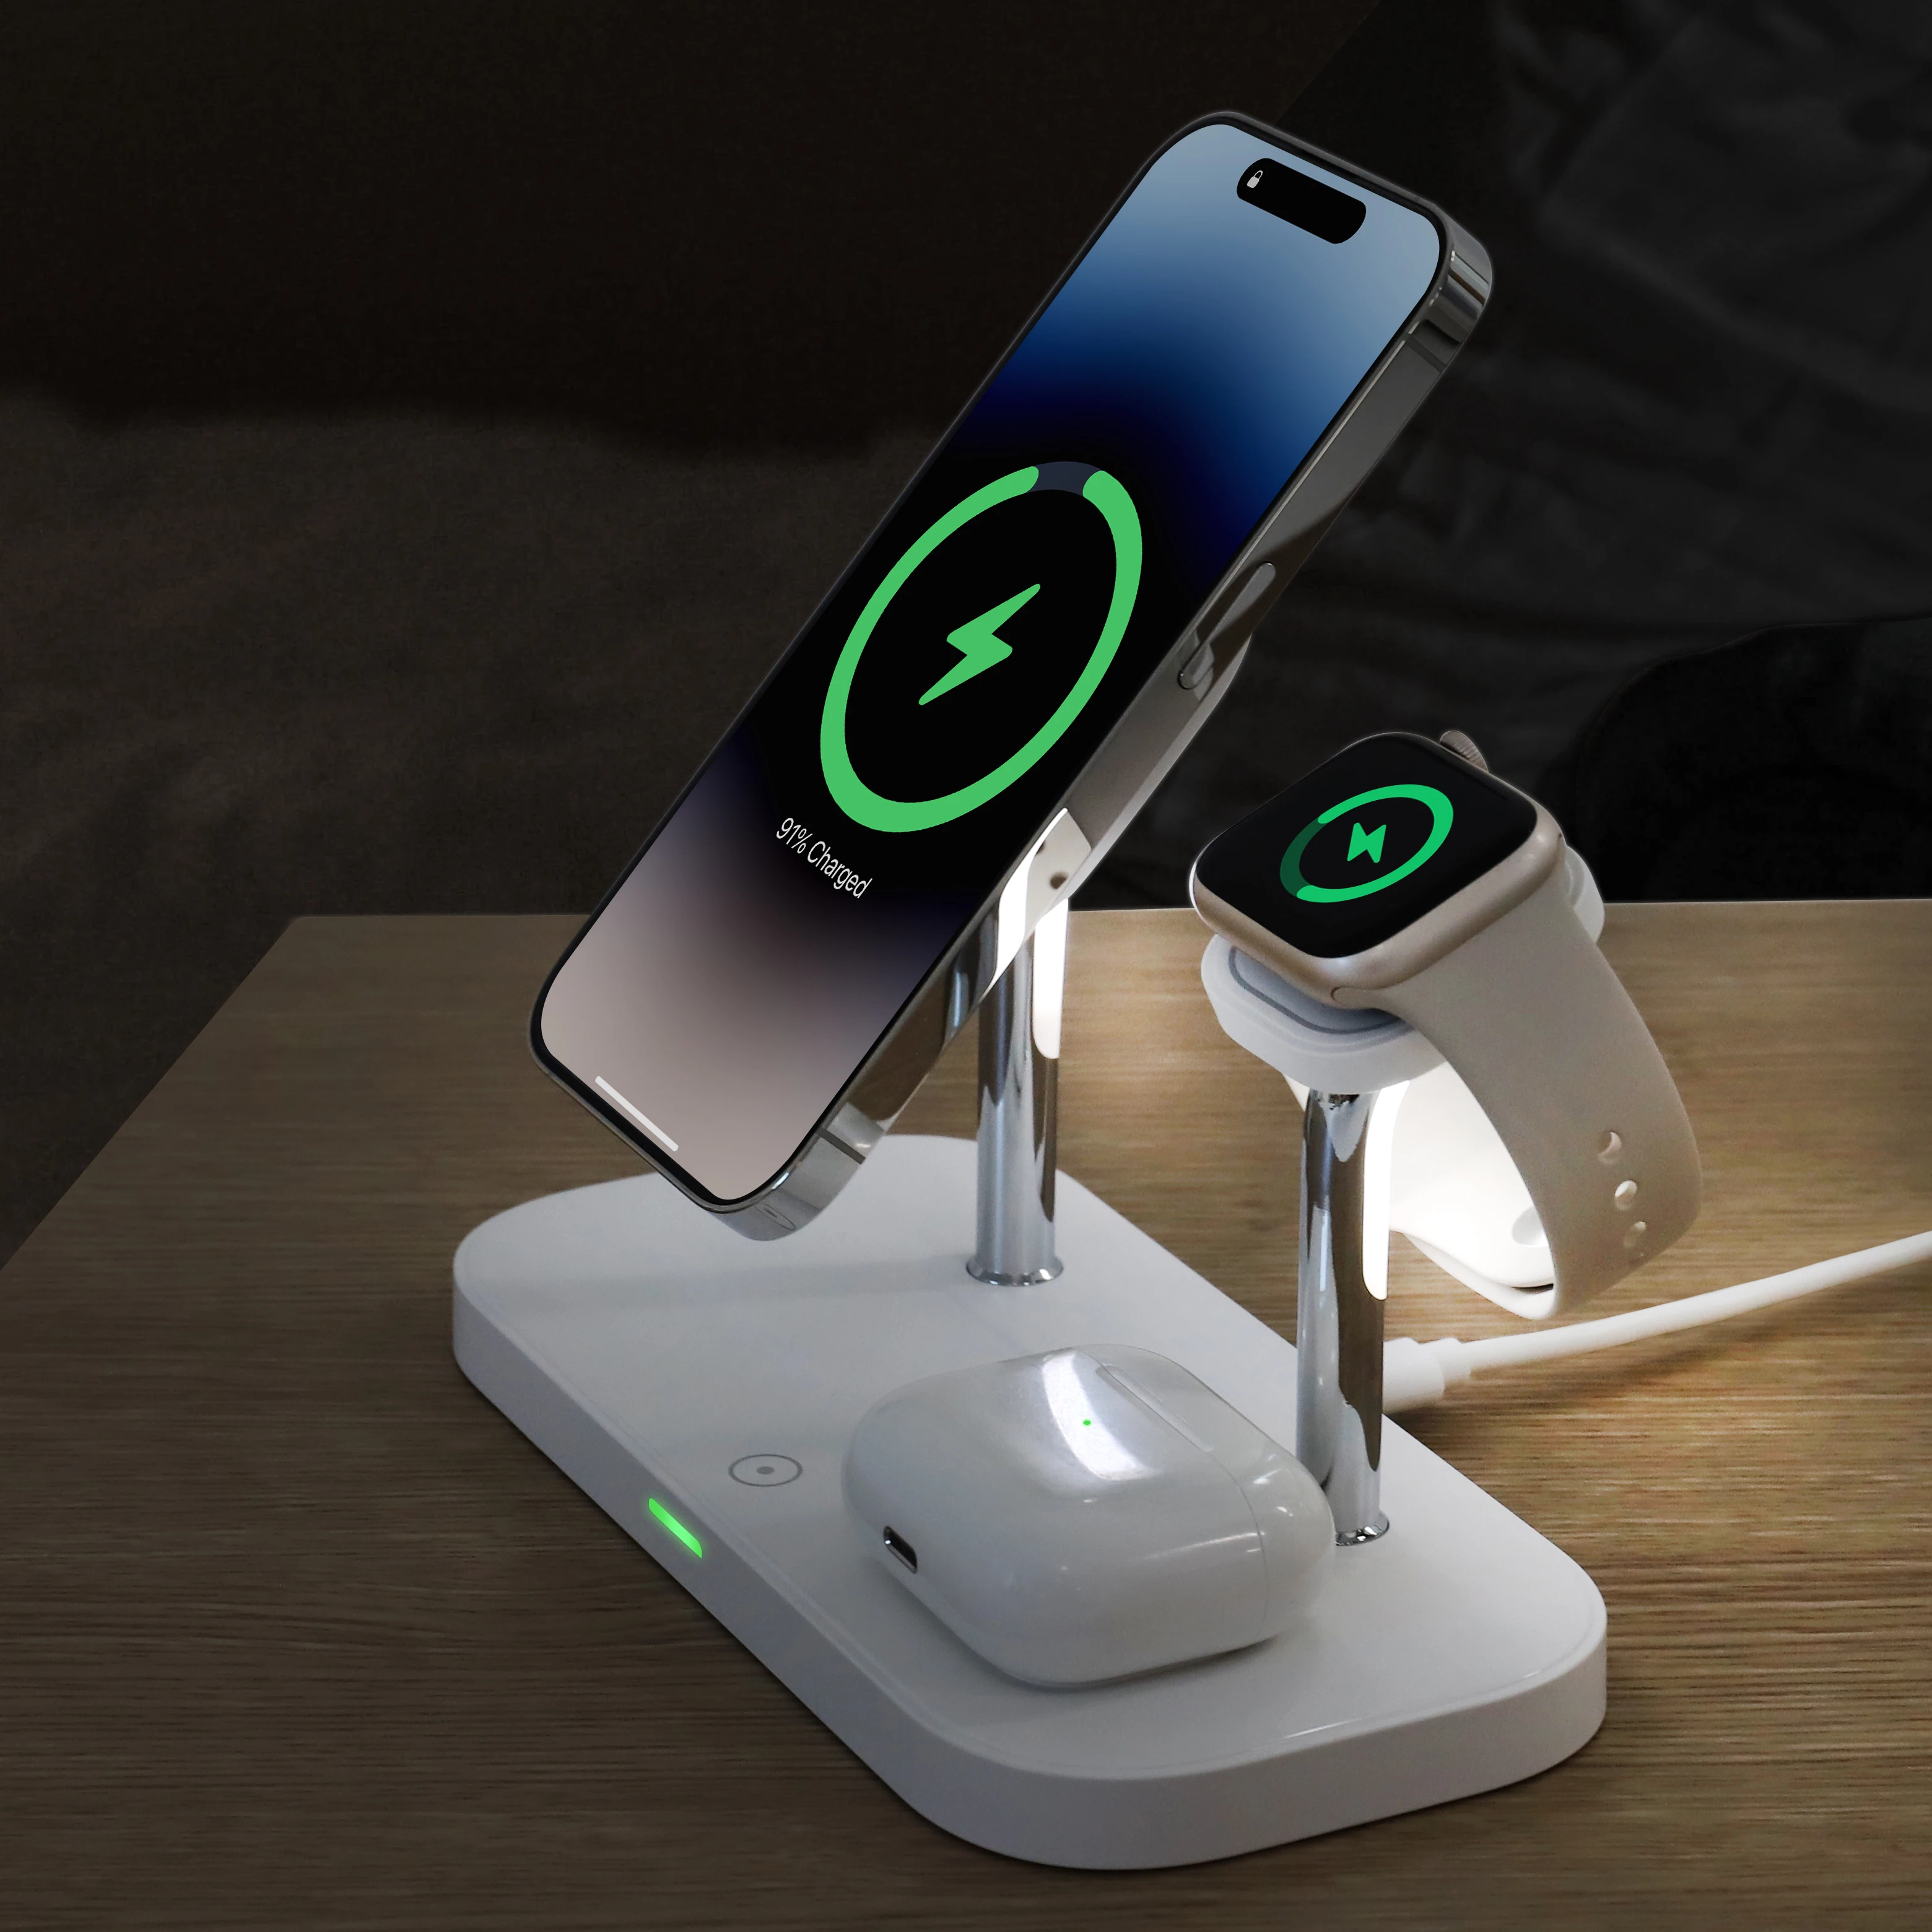 

3 in1 iPhone Mac safe charger for iPhone wireless charger iPhone 13 iPhone 12 iPhone 11